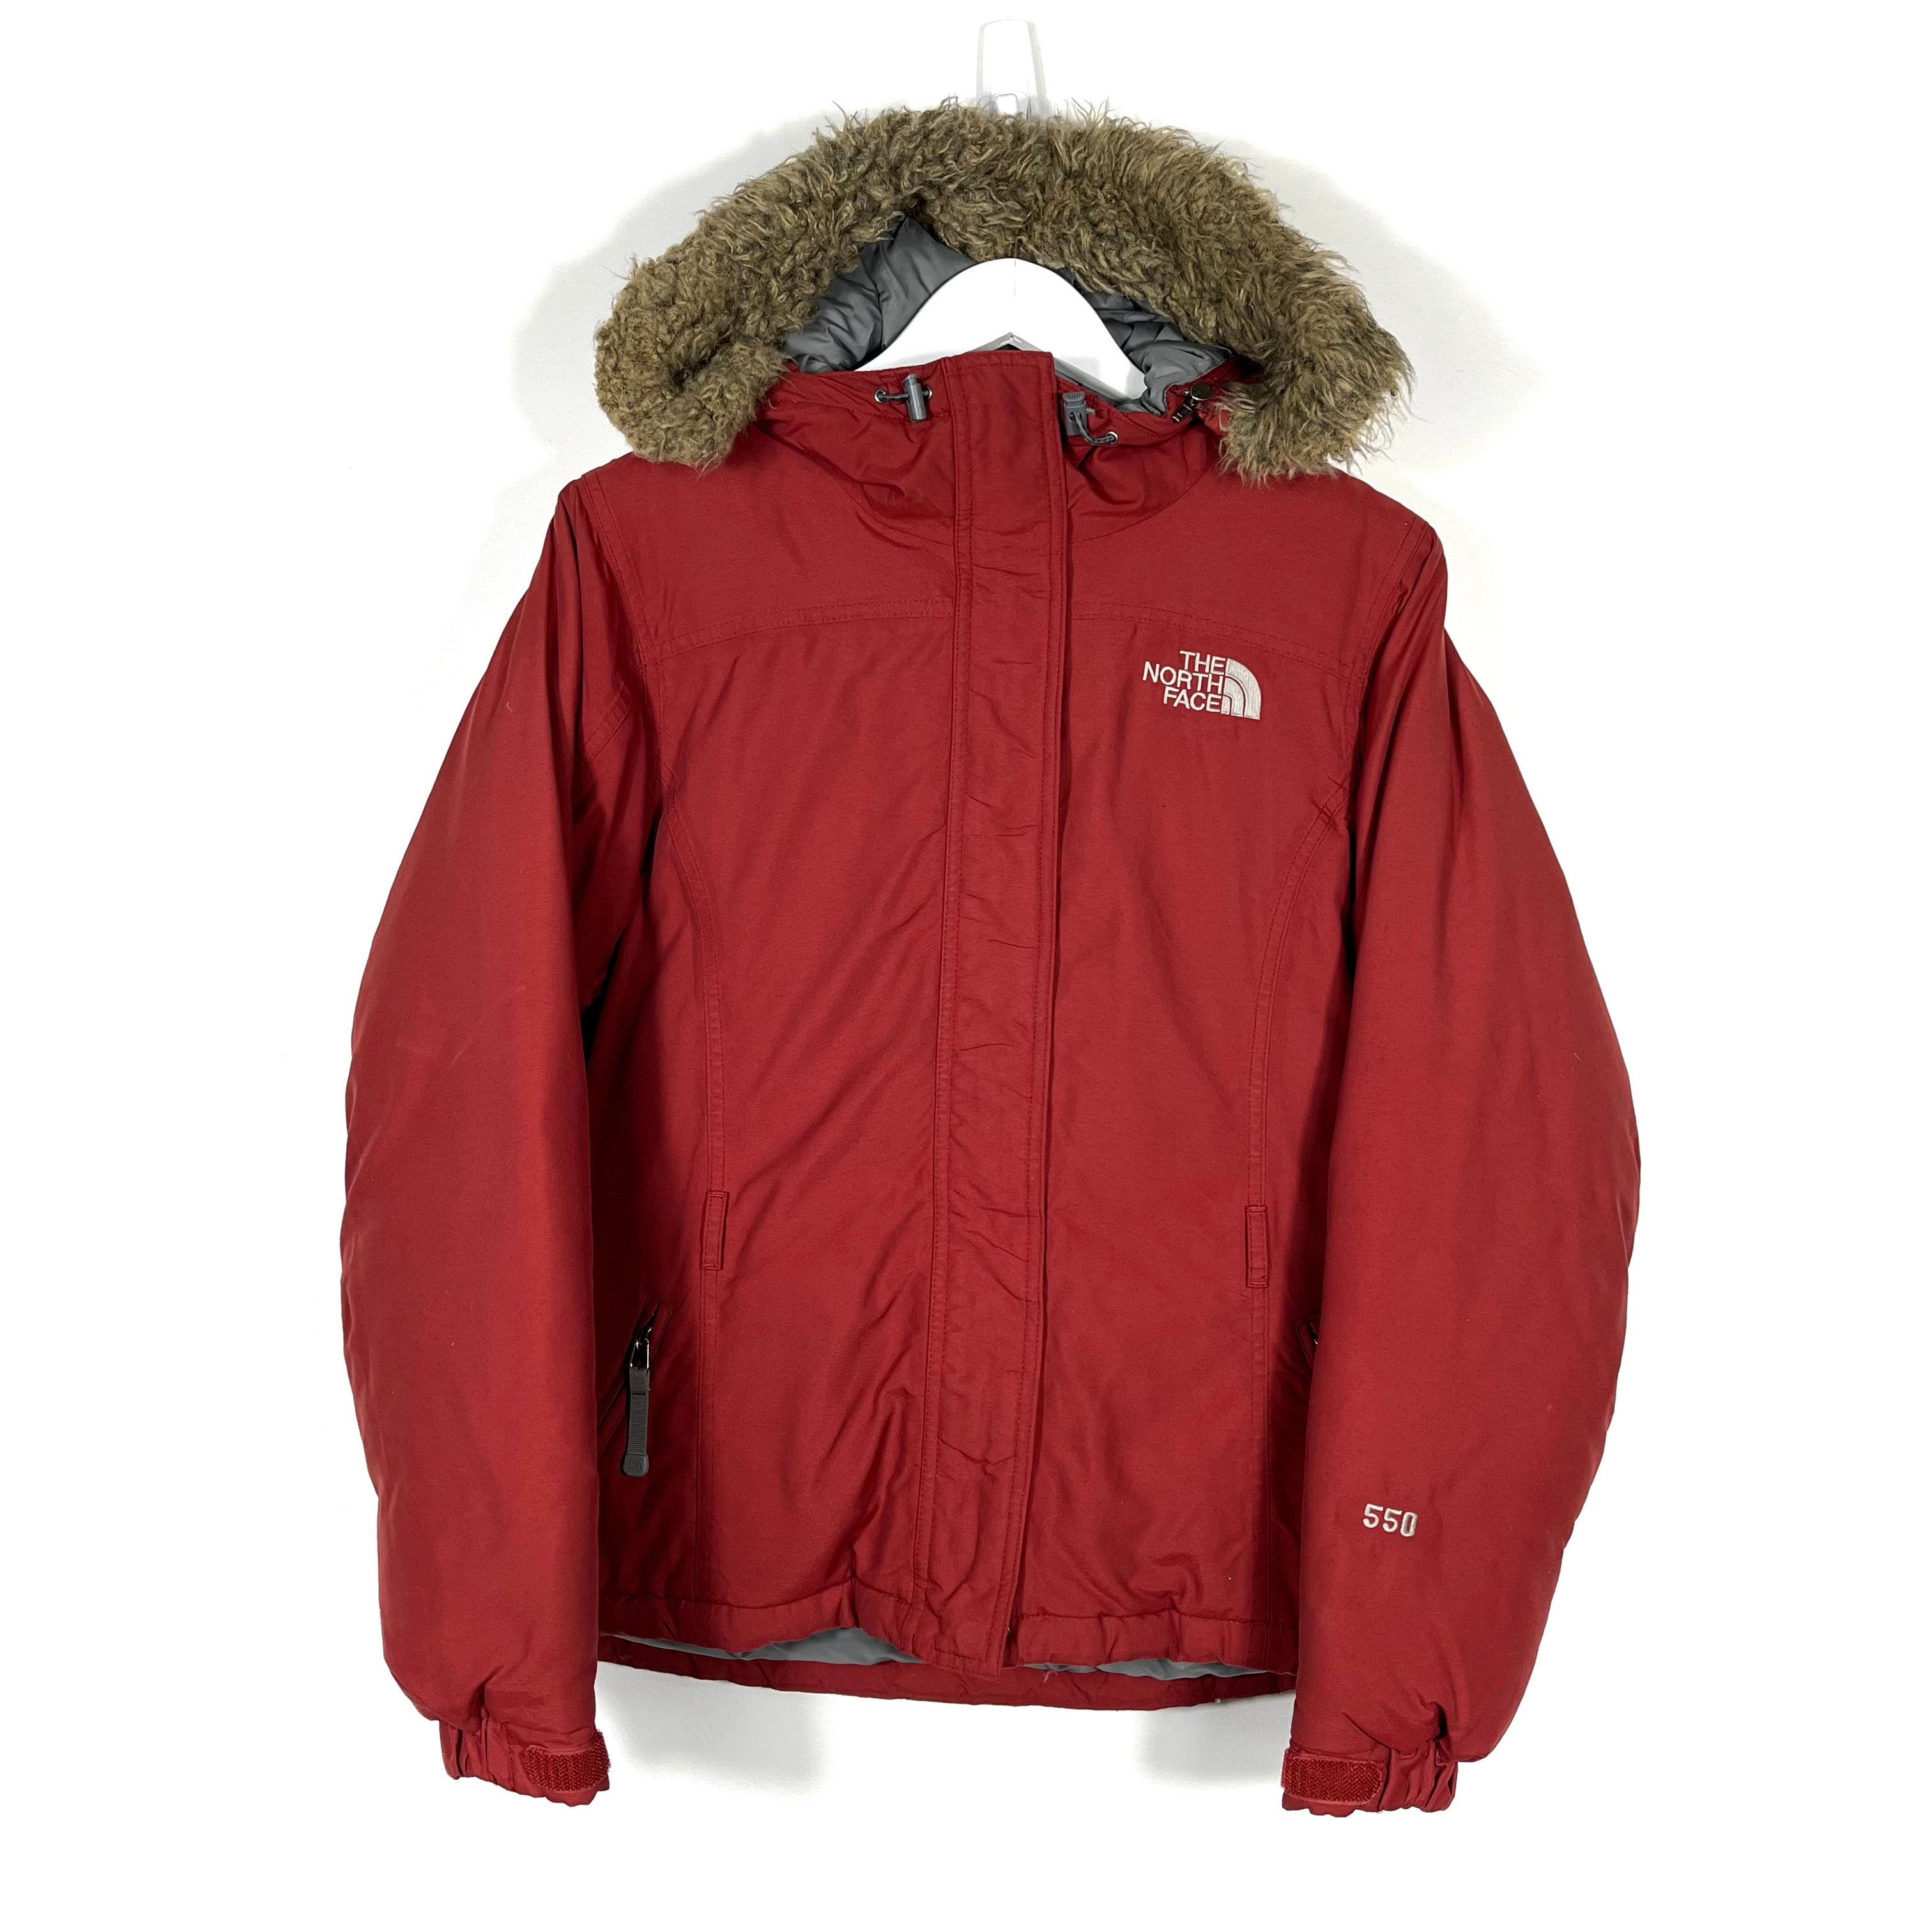 Vintage The North Face 550 Series Insulated Jacket - Women's Small